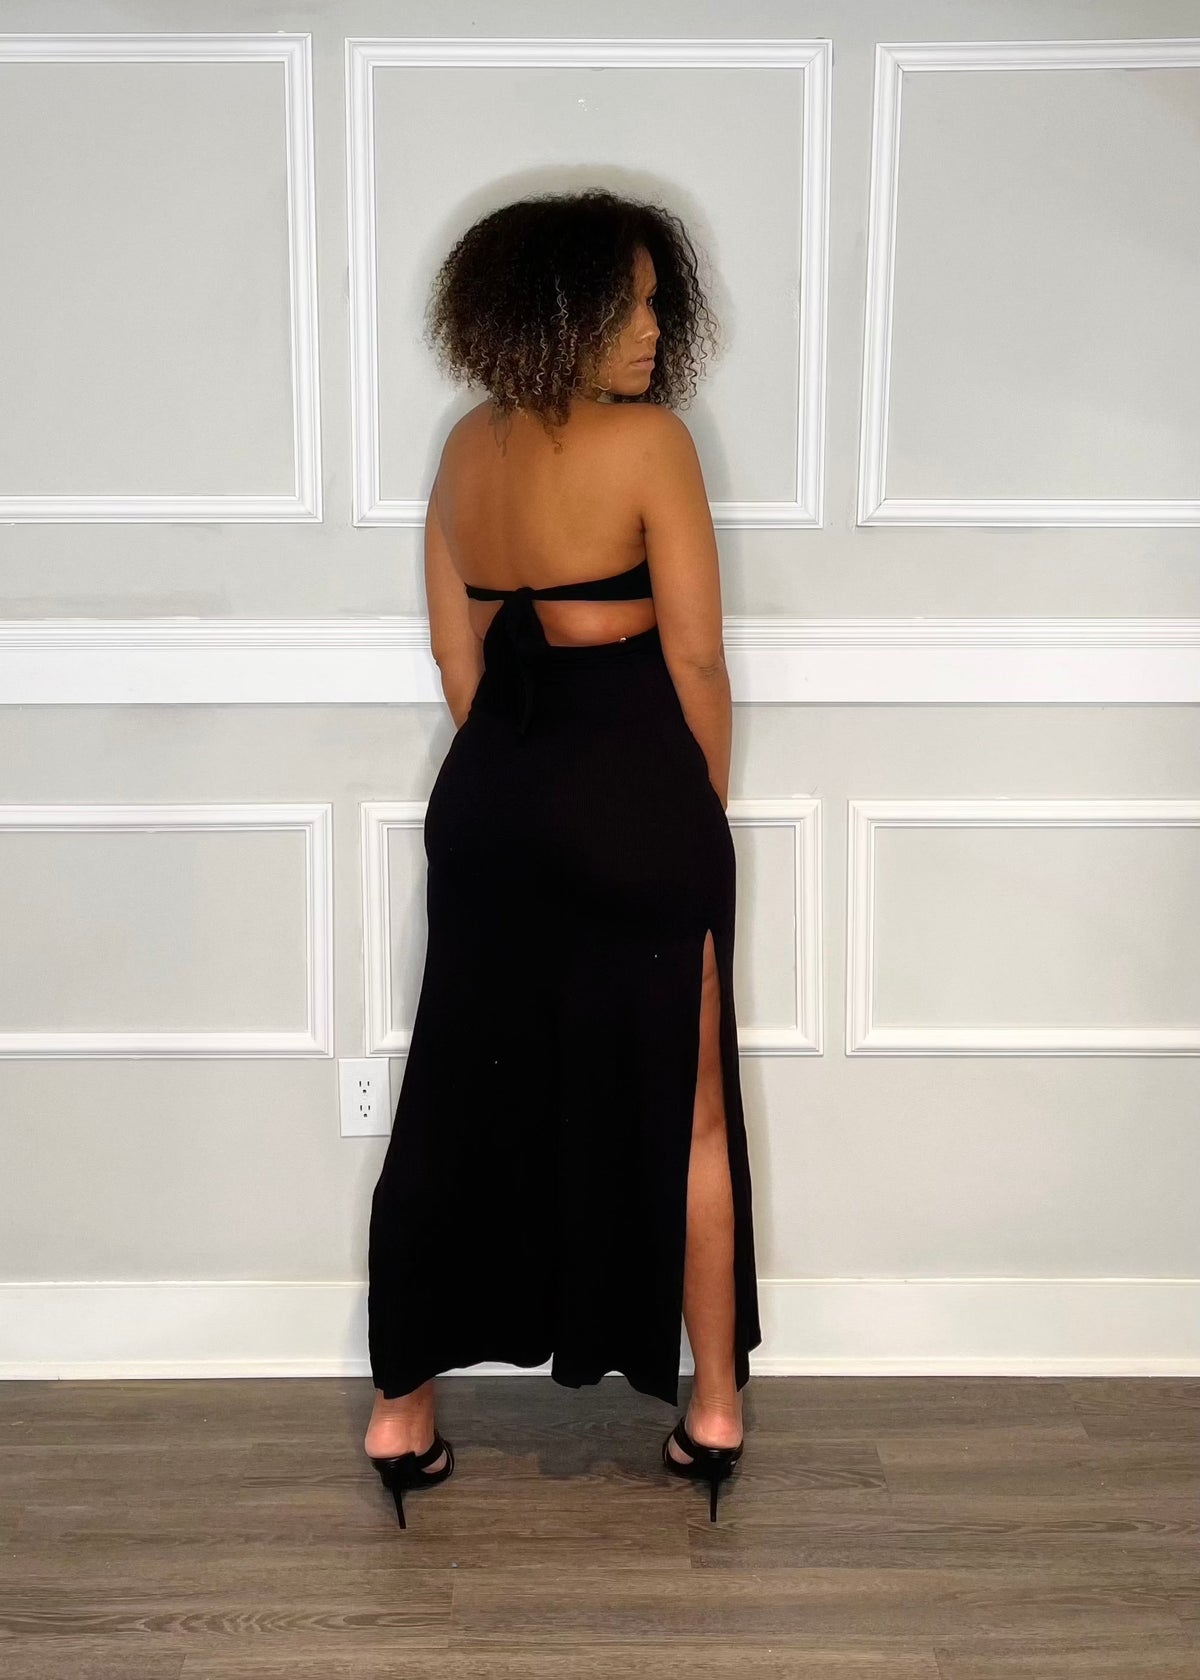 Get trendy with Britt Black Halter Cut-out Maxi Dress - Dresses available at ELLE TENAJ. Grab yours for $20 today!